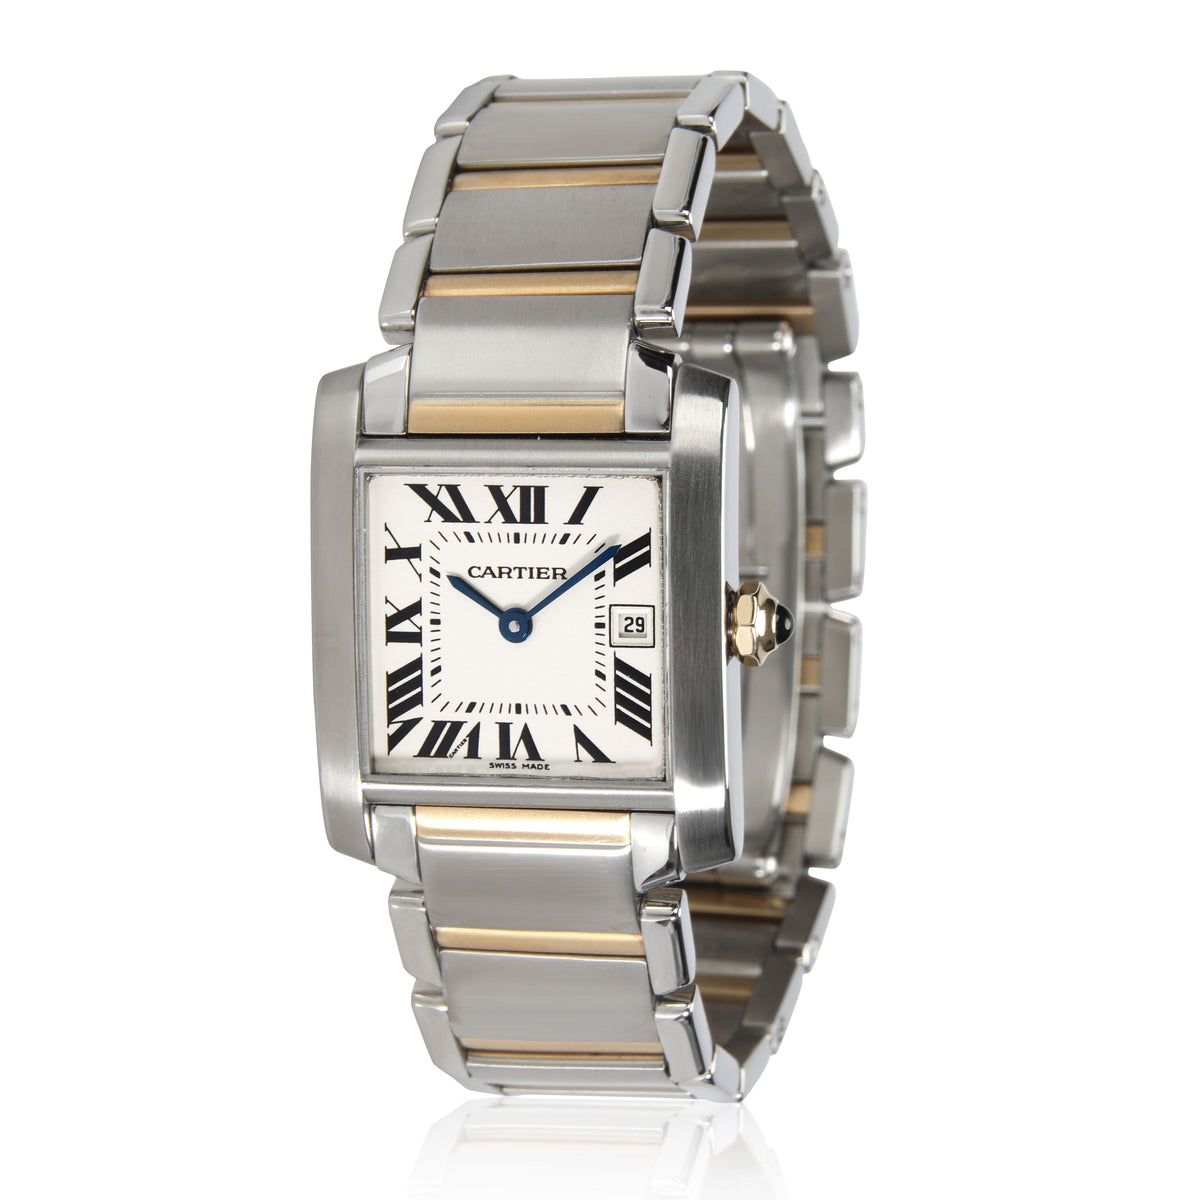 Cartier Tank Francaise W51012Q4 Unisex Watch in 18kt Stainless Steel/Yellow Gold